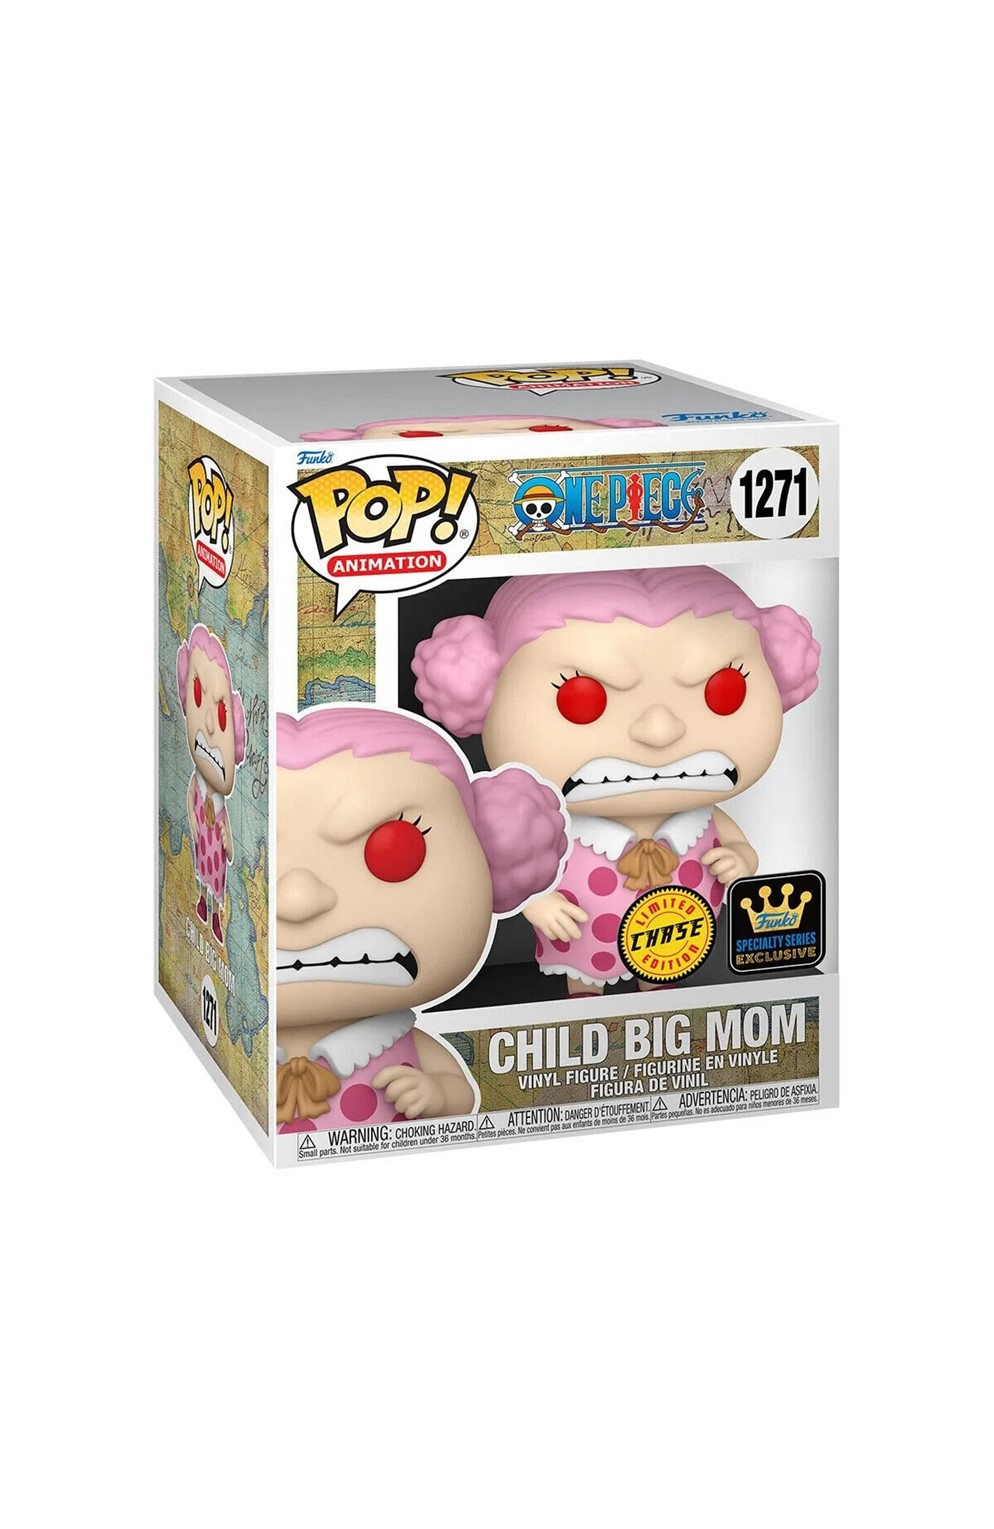 One Piece Child Big Mom Super 6-Inch Pop! Chase Vinyl Figure - Specialty Series